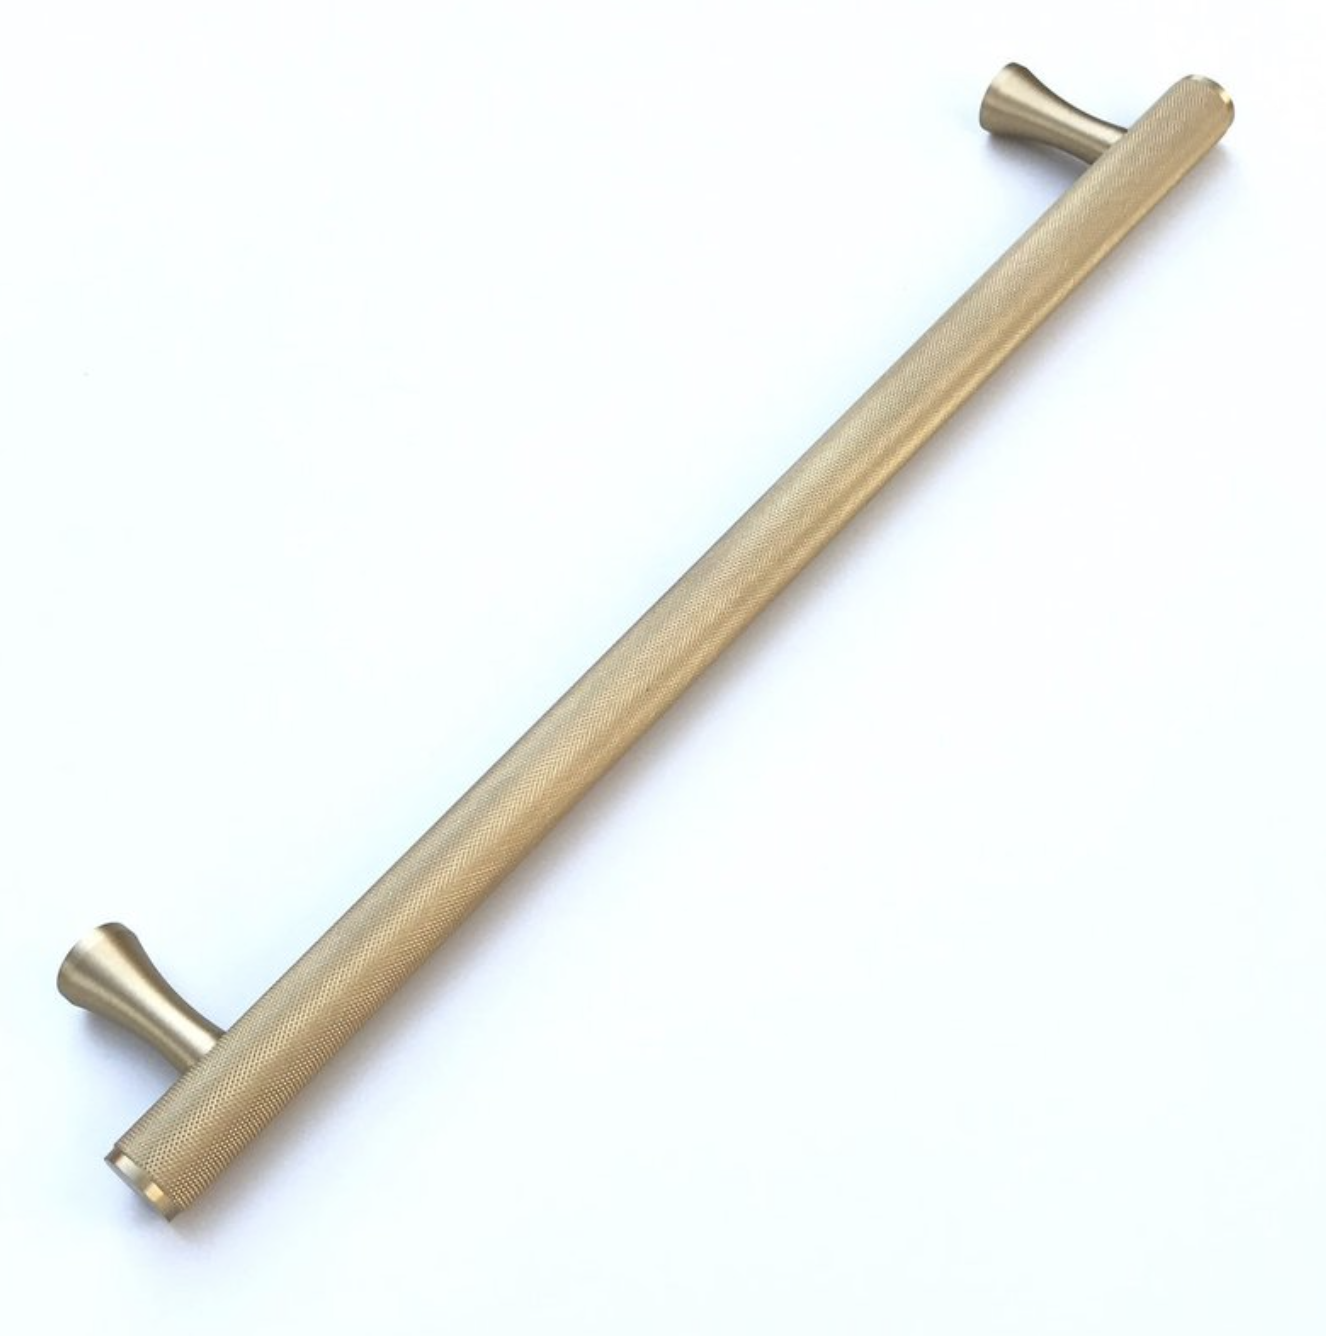 Brass Solid "Texture" Knurled Drawer Pulls and Knobs in Satin Brass | Pulls